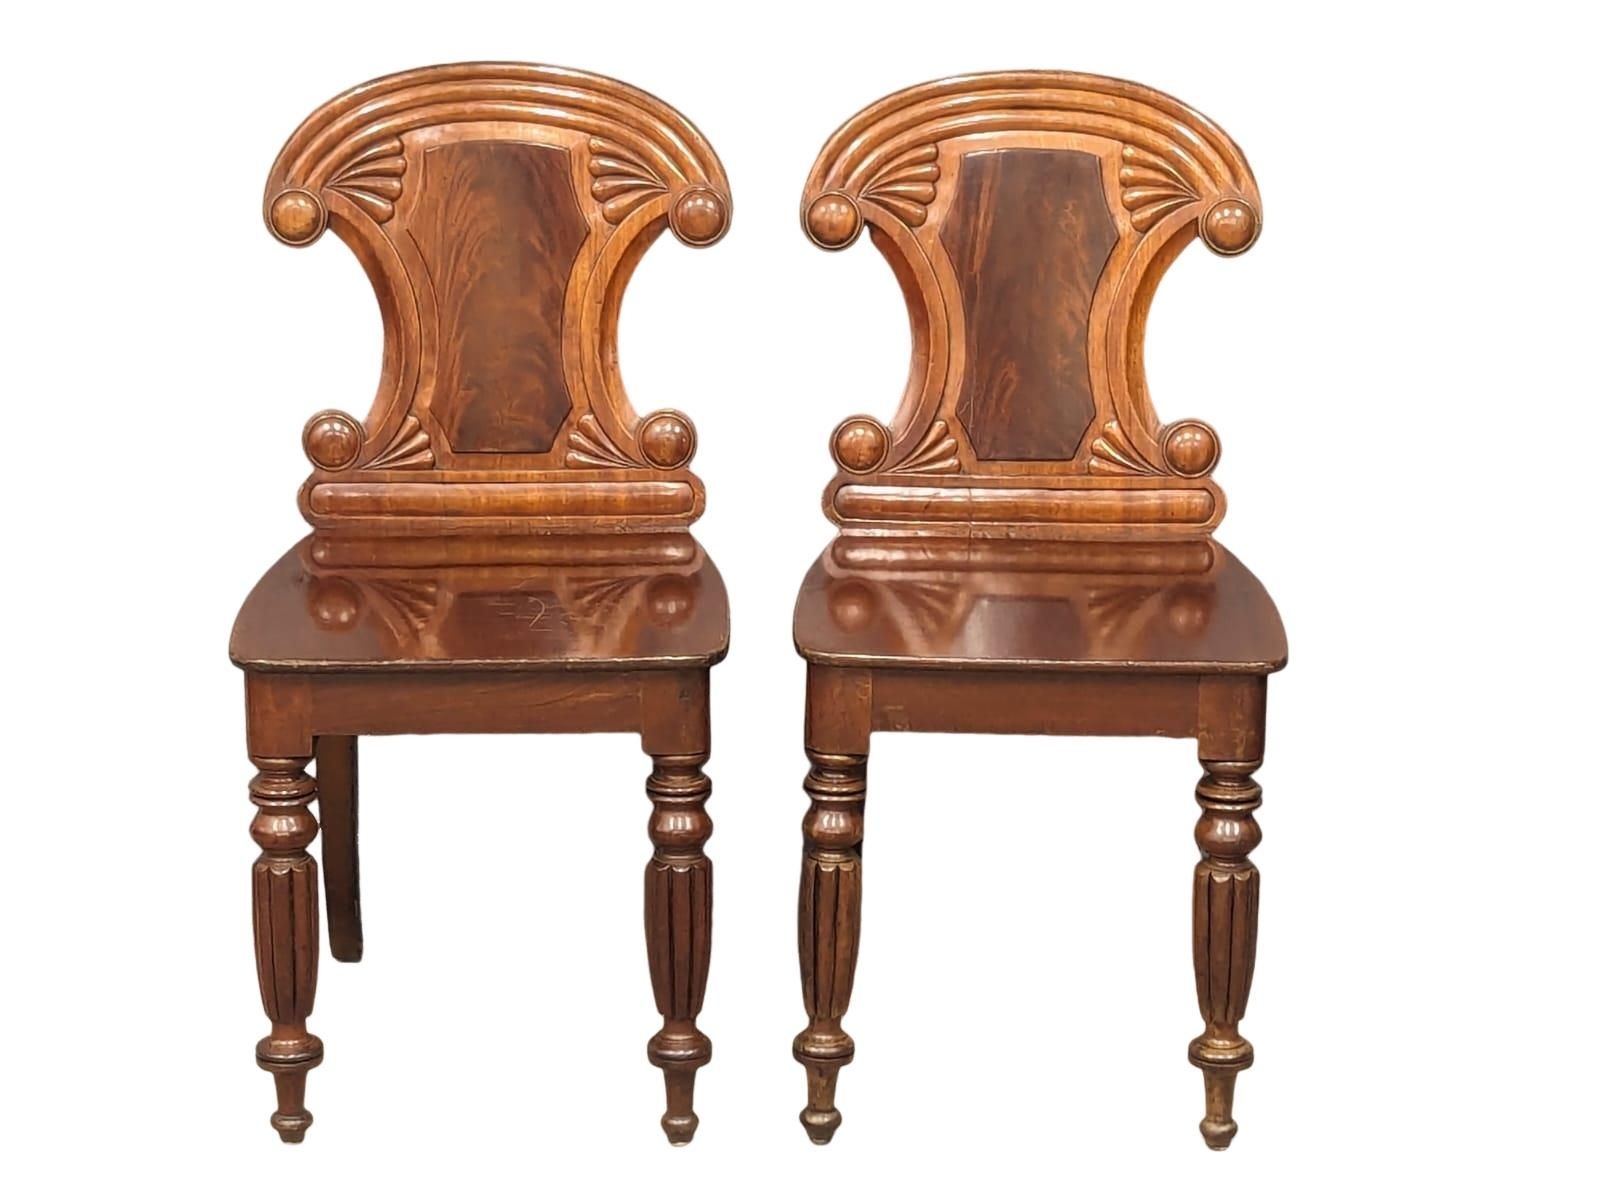 A pair of late George IV-Early William IV ornate mahogany hall chairs - Image 5 of 6